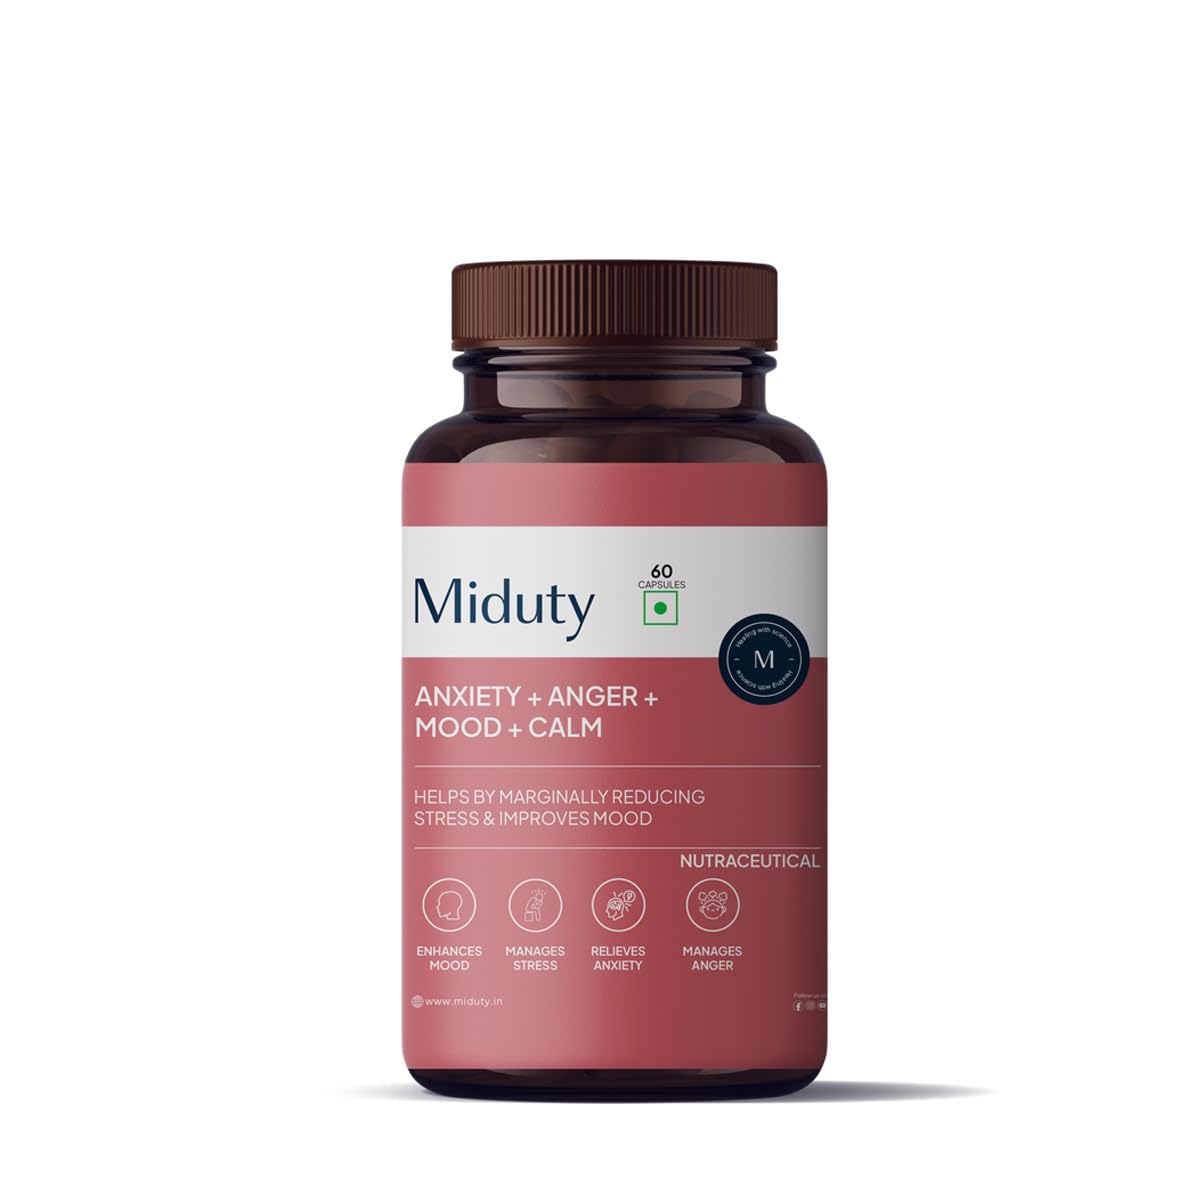 Miduty by Palak Notes Anxiety + Anger + Mood + Calm Capsules - Distacart